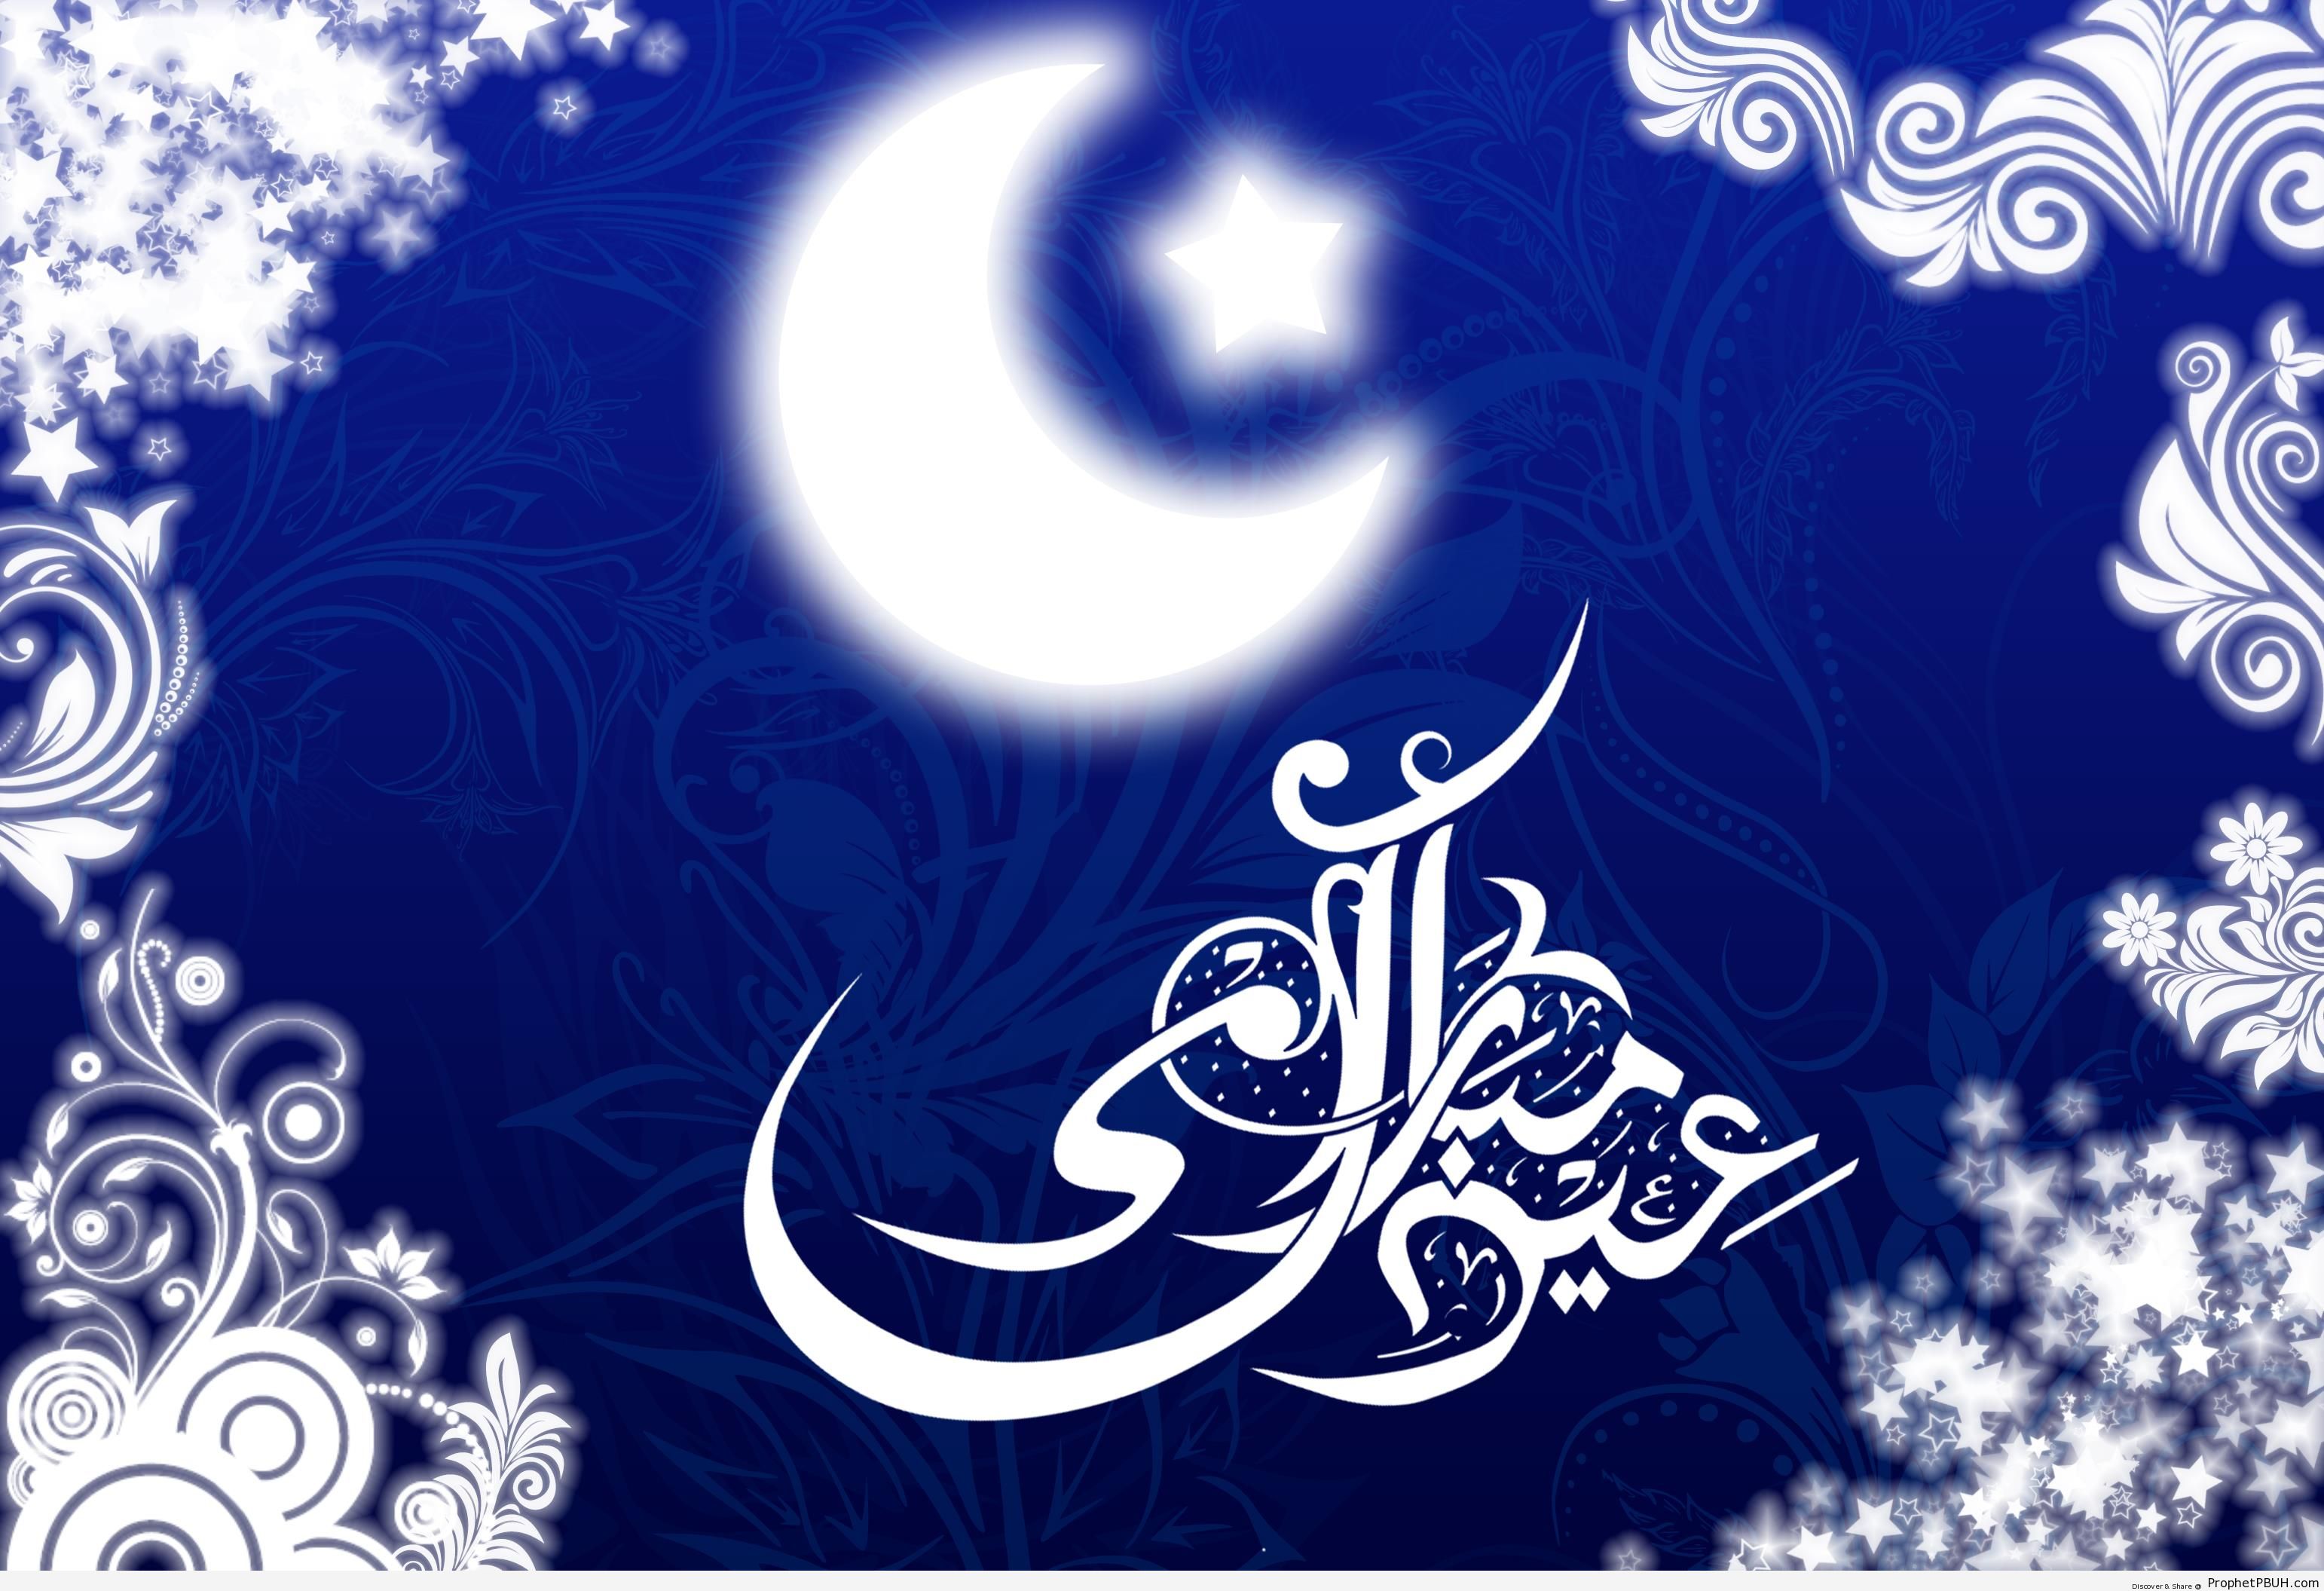 Eid Mubarak Greeting with Crescent Moon and Star on Blue Background - Drawings of Crescent Moons 